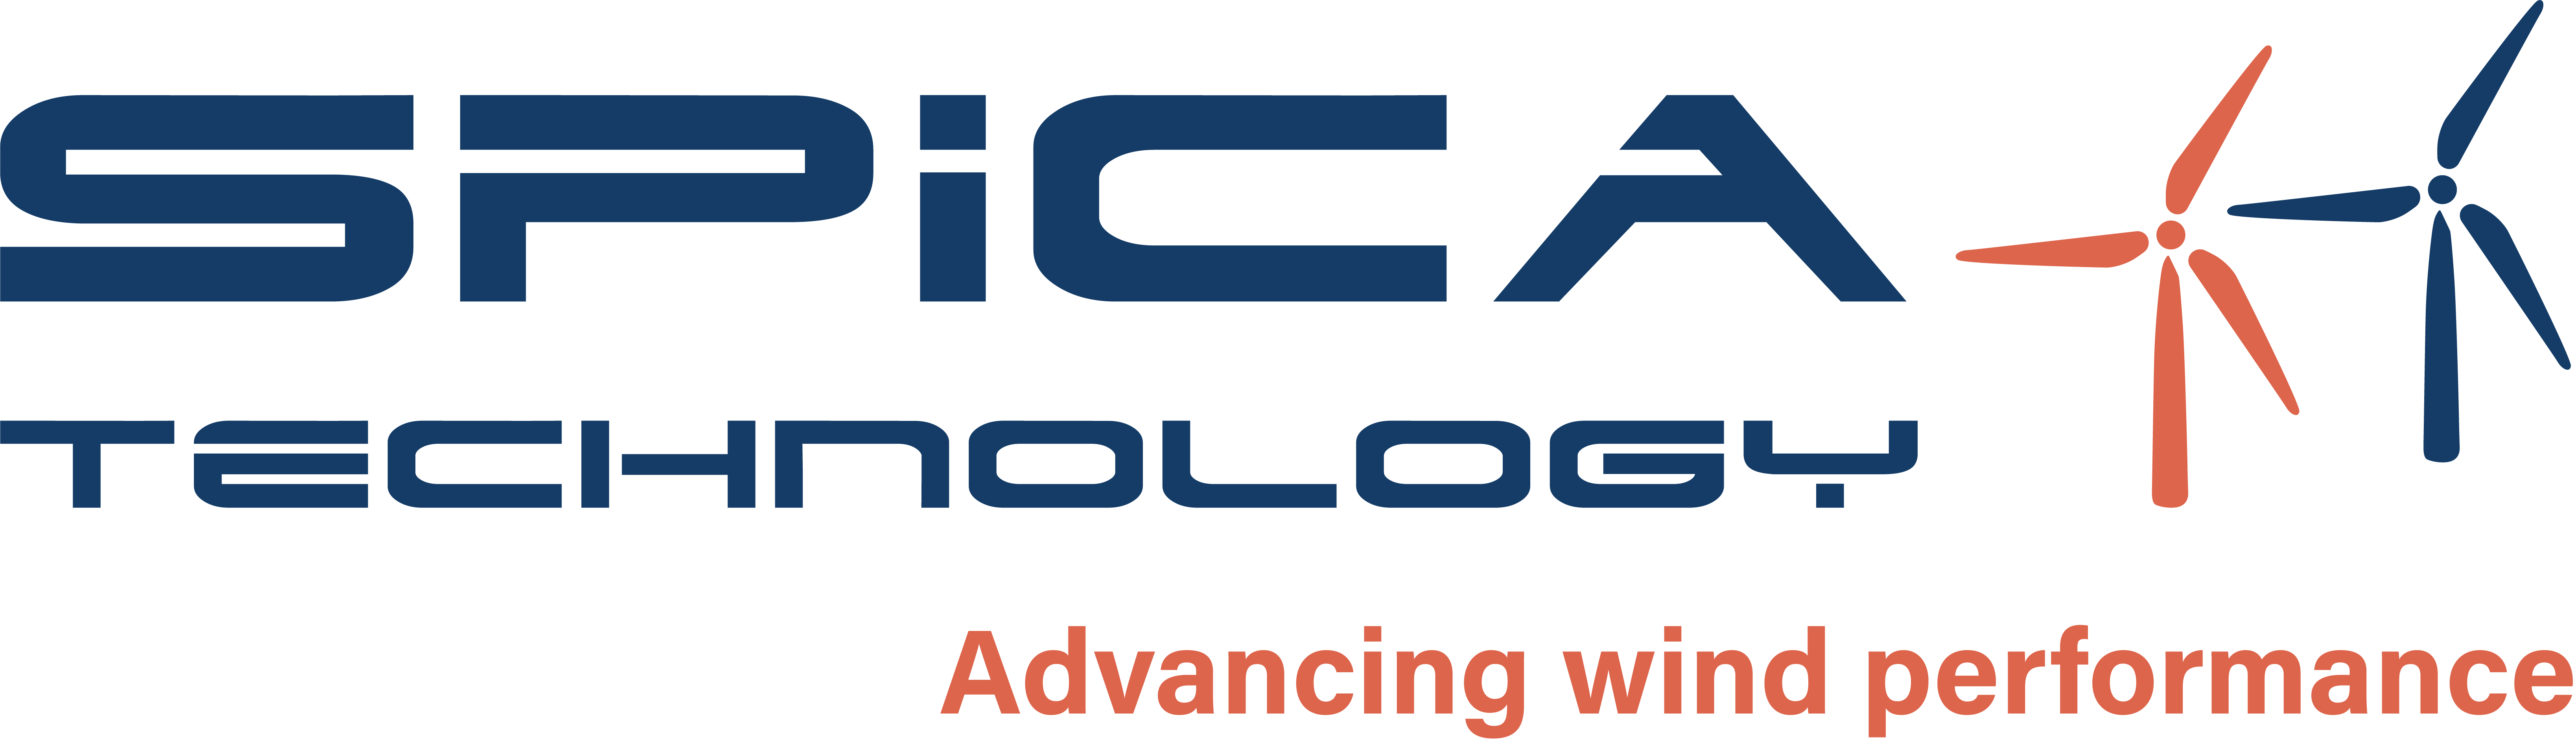 Spica Technology